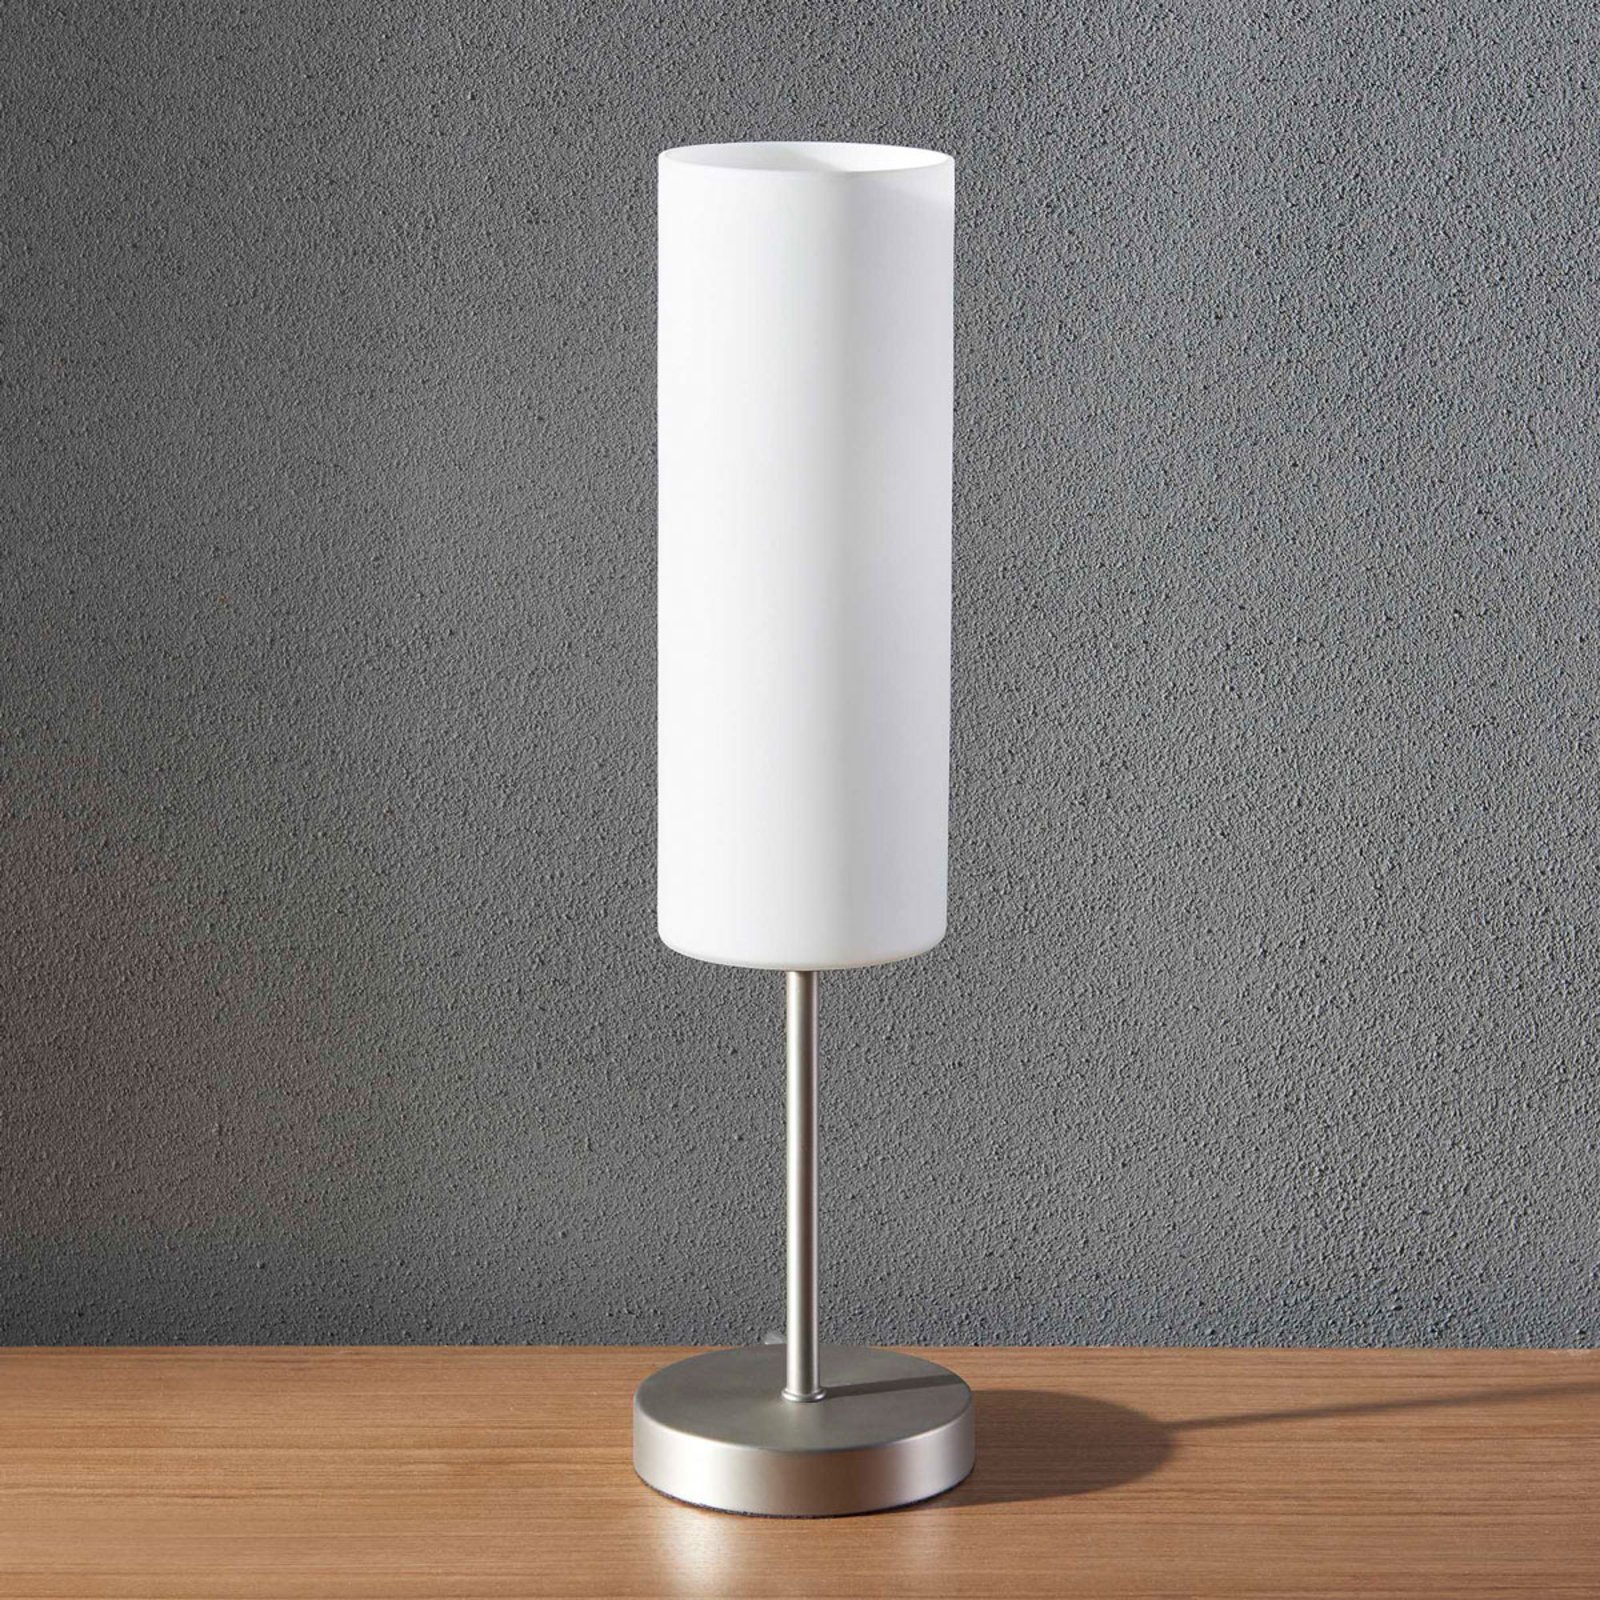 Slim Table Lamp Vinsta With White Glass, Tall Thin Table Lamps With Small Shades